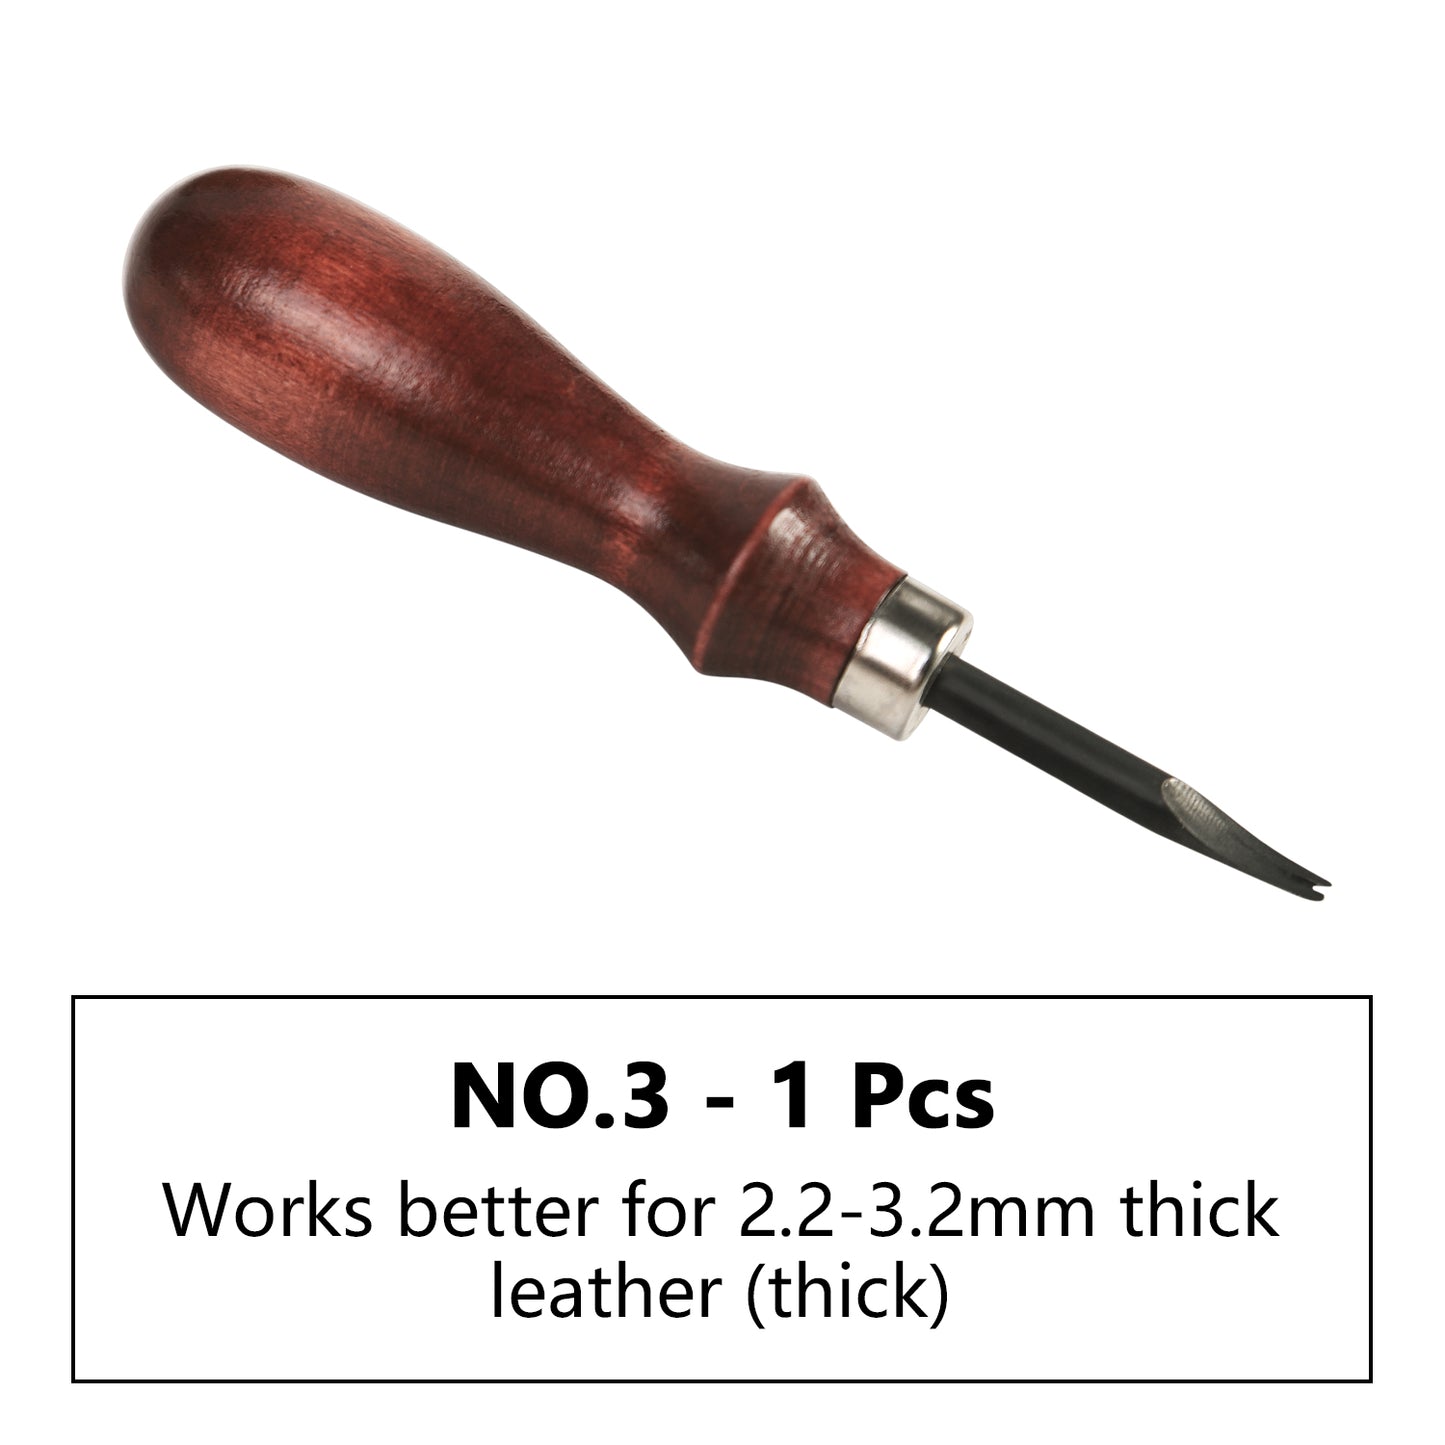 Craft Sha Flint Leather Tools 140mm Leathercraft Edge Beveler VG10 Stainless Edger 0.6mm-2.4mm, to Bevel & Smooth Edges in Leatherwork